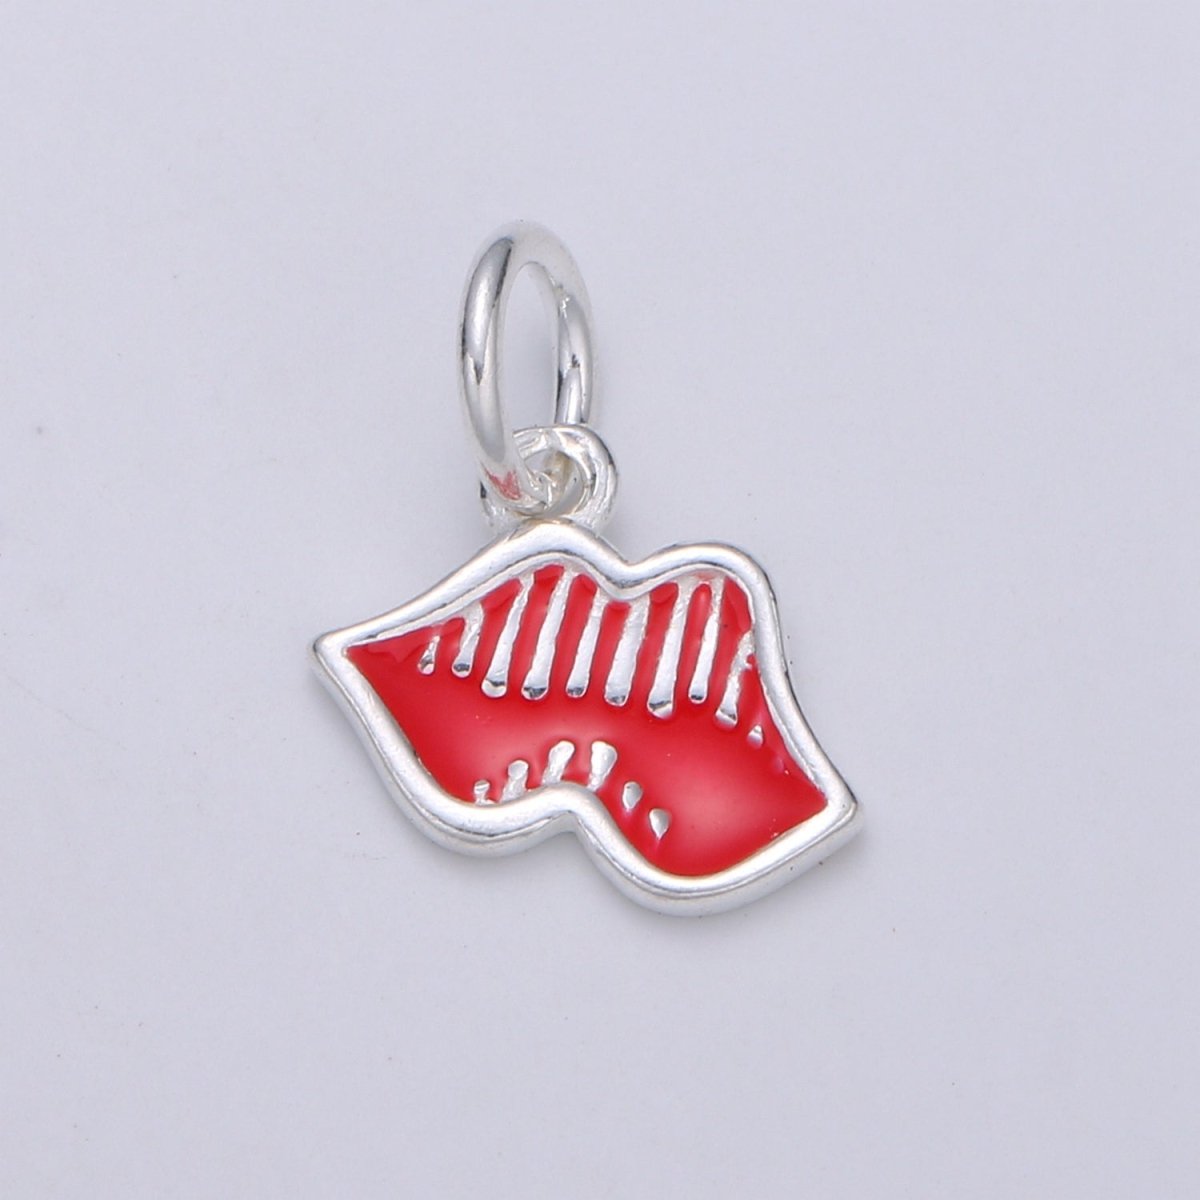 925 Sterling Silver Red Hot Lips Flower Charm, Lip Charm Silver Mouth Charm for Necklace Bracelet Earring, Makeup Charm SL-053 - DLUXCA